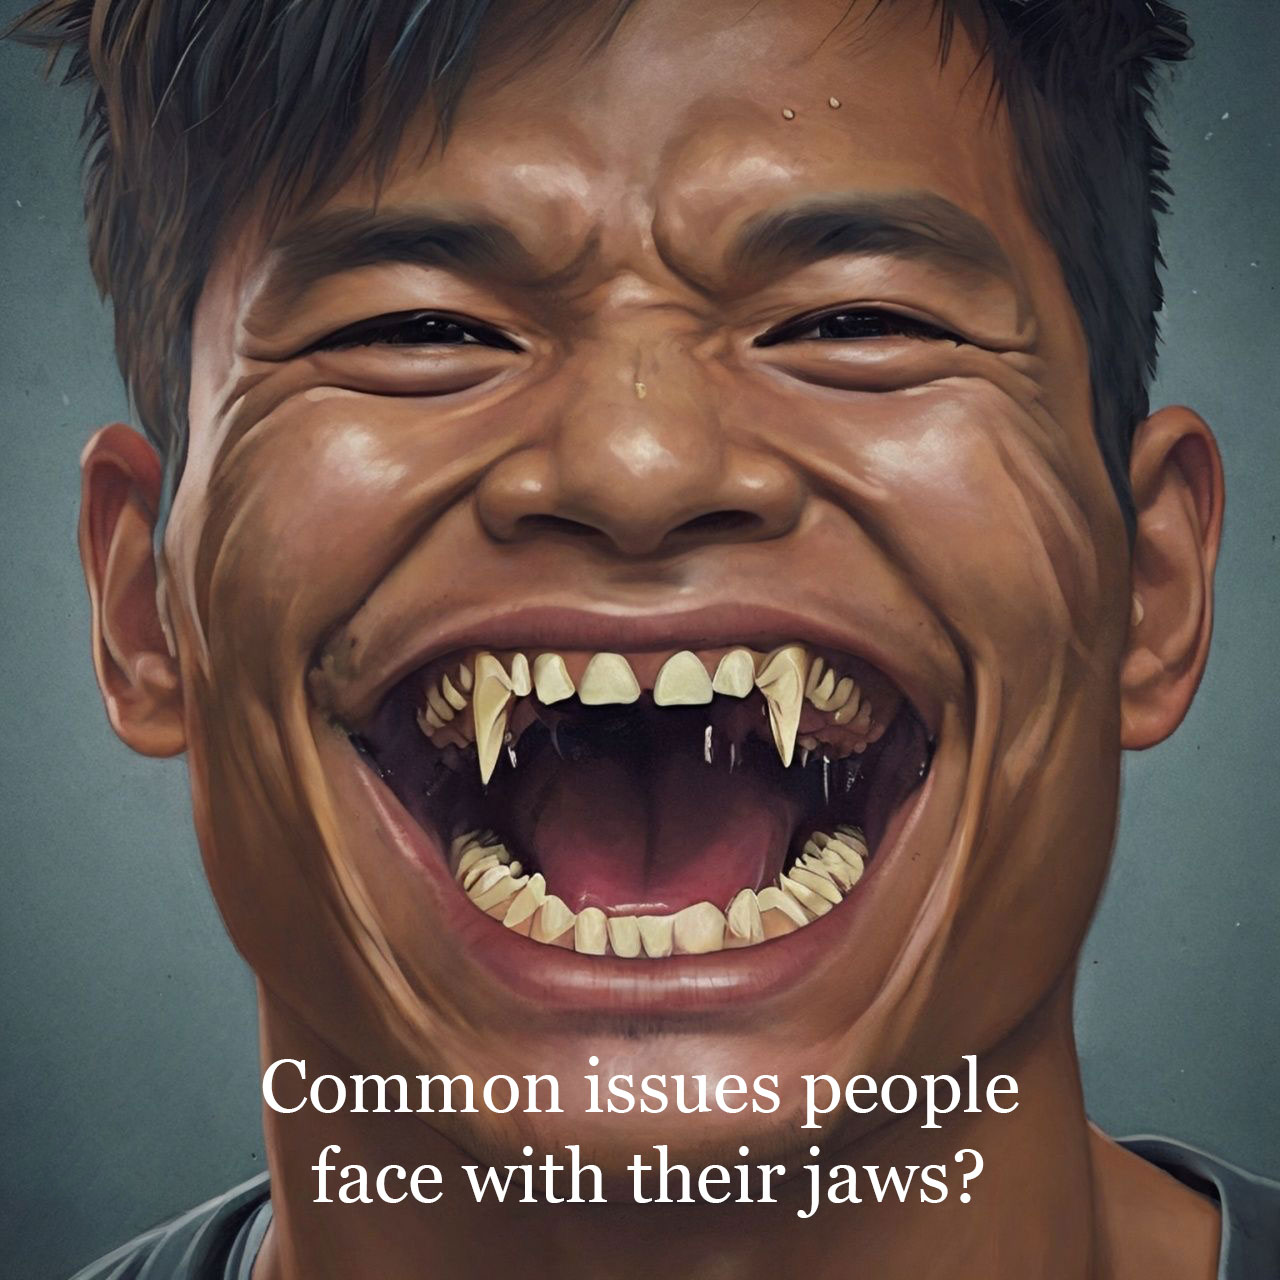 What are some of the common issues people face with their jaws?